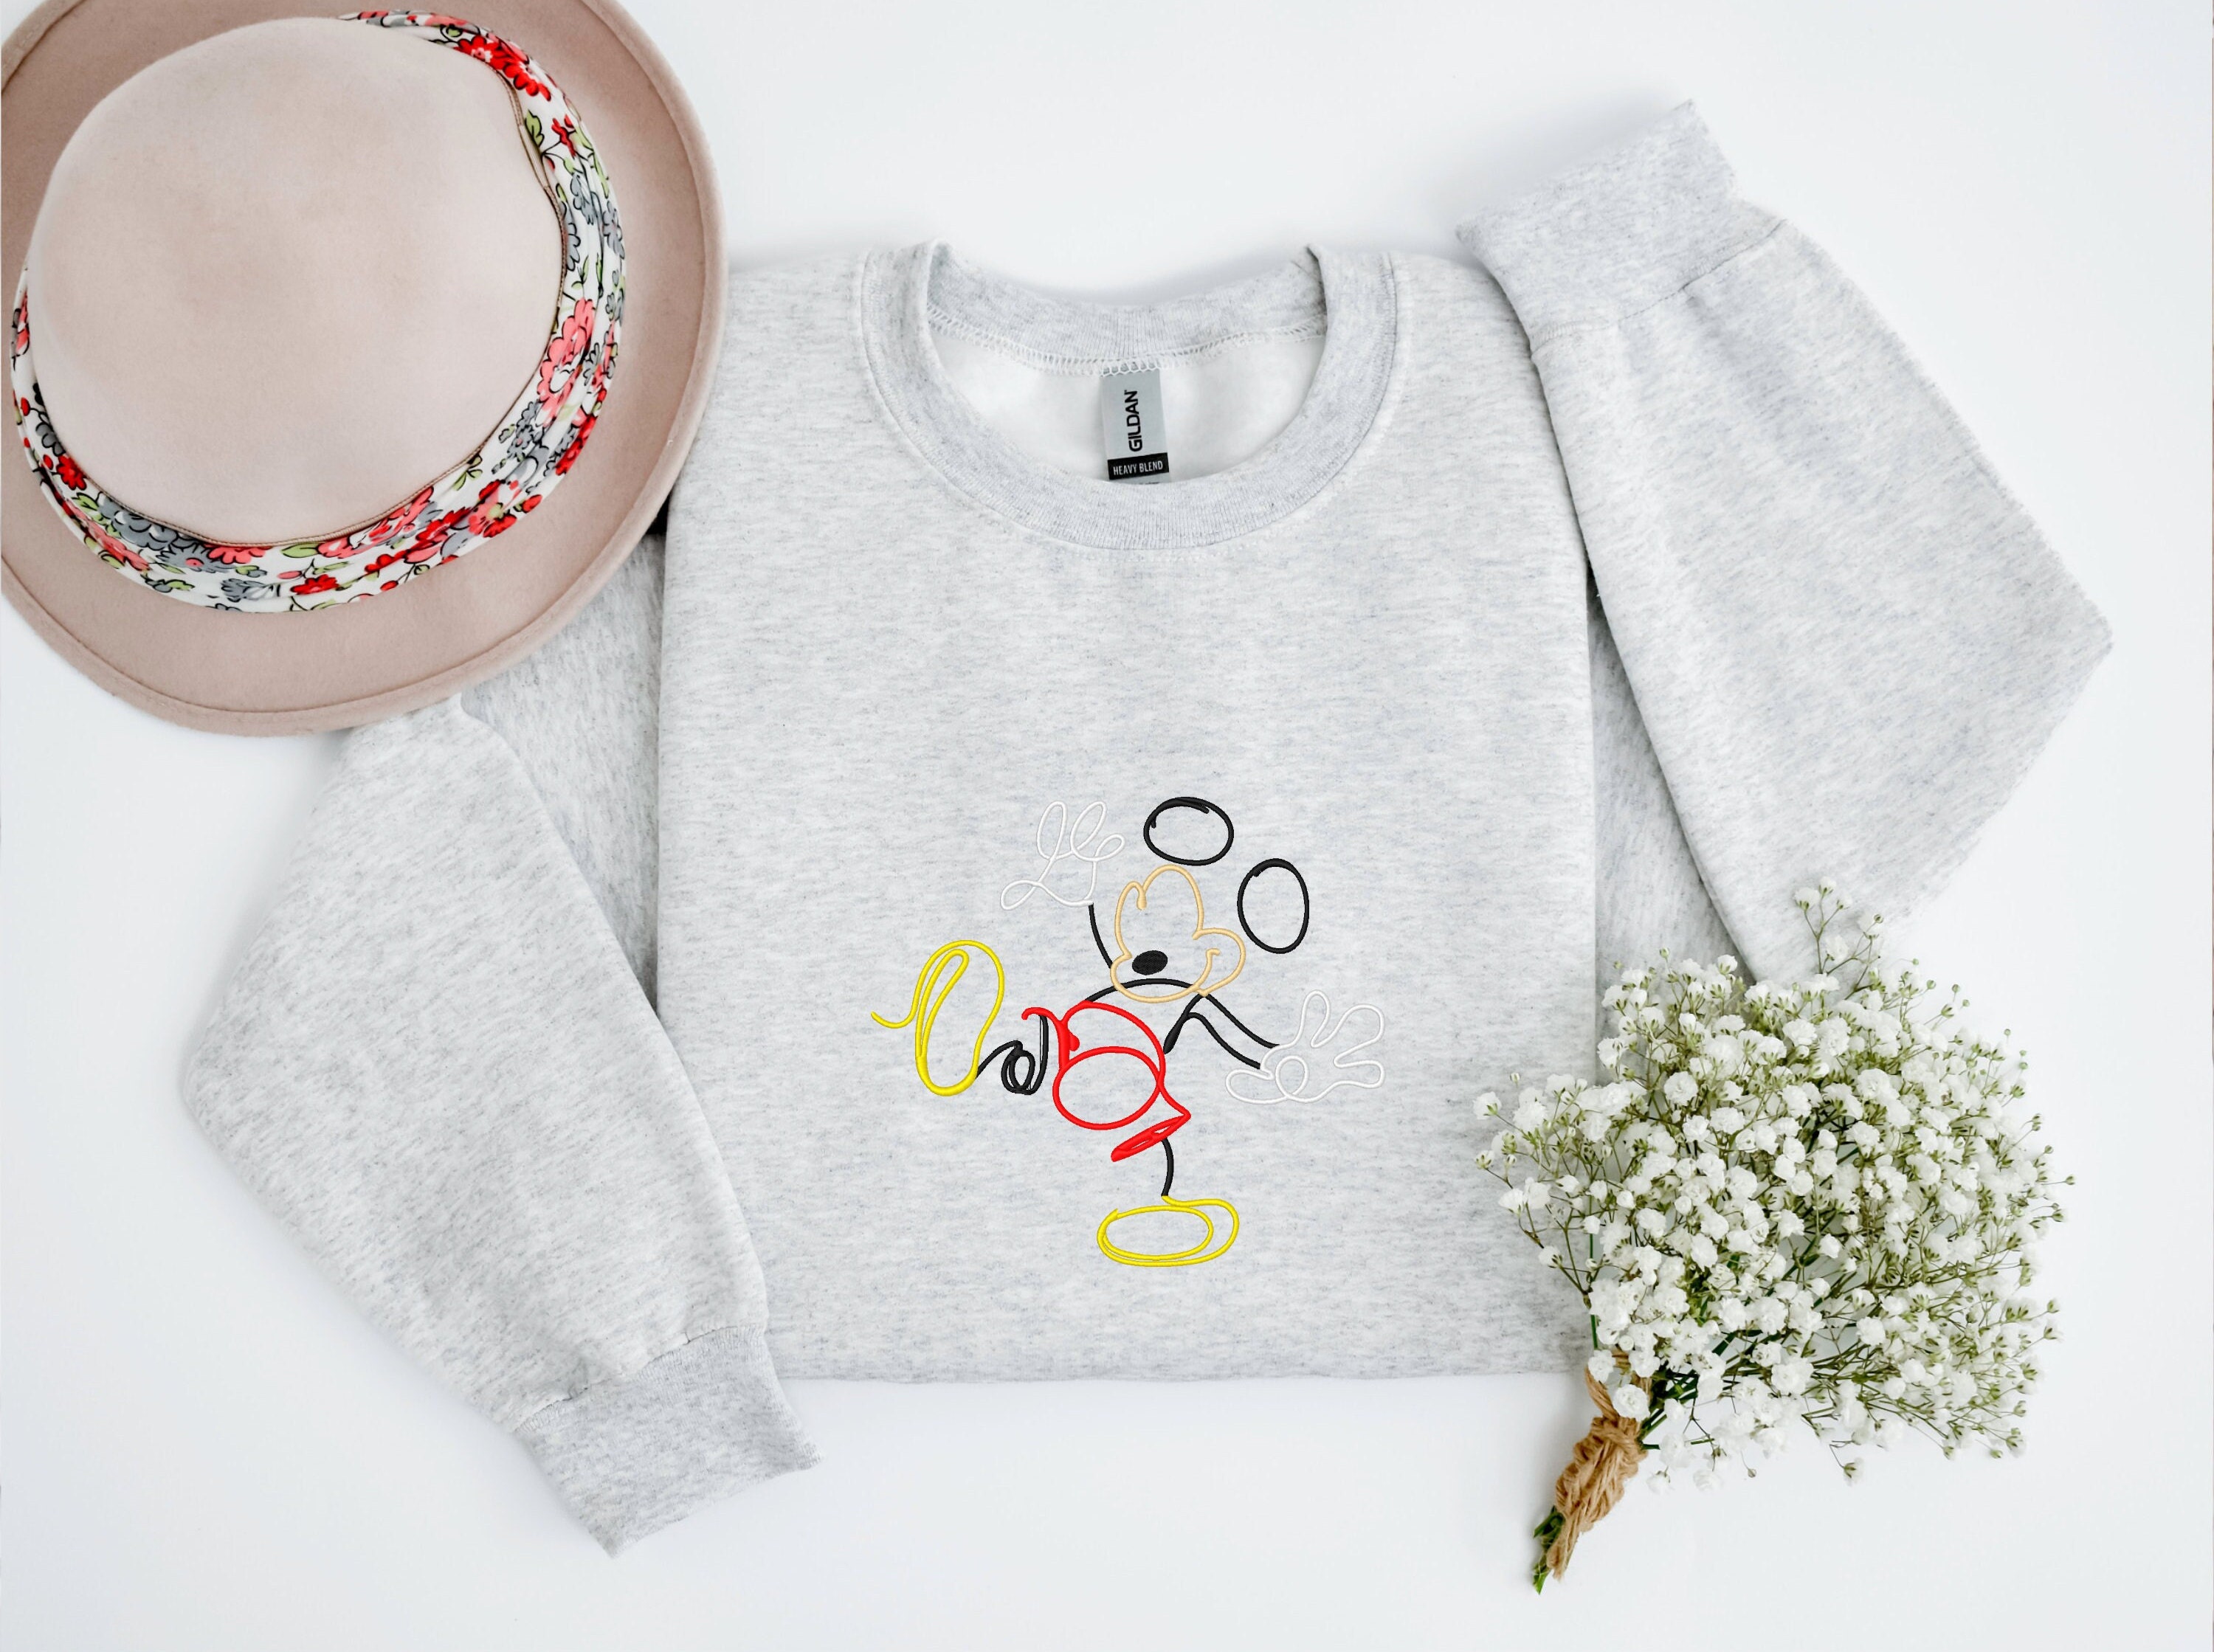 Discover Embroidered Disney Shirt - Mickey Sweatshirt - Disney Embroidered Sweatshirts